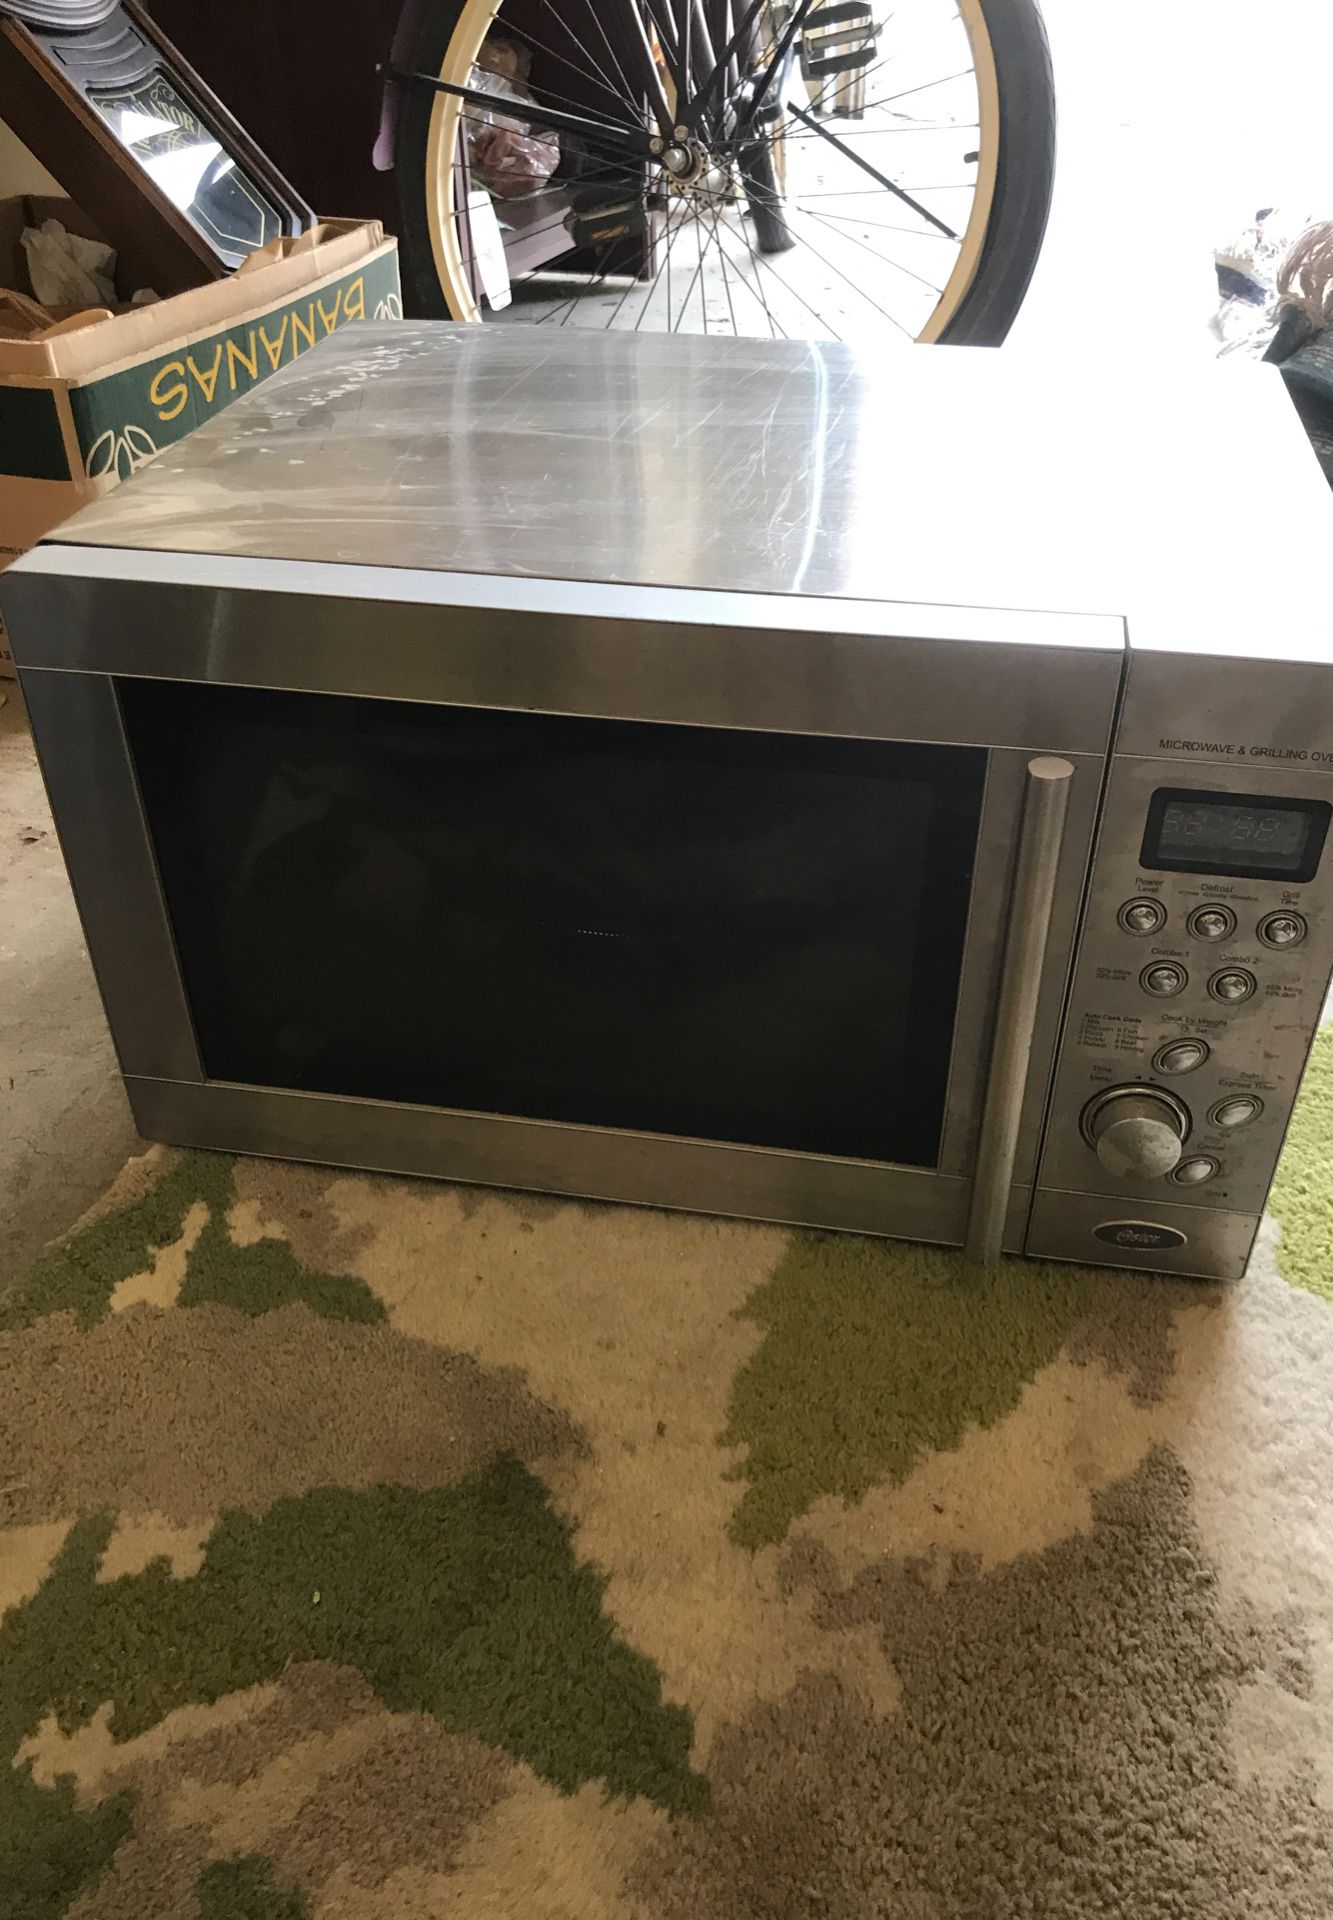 Oster microwave and grilling oven